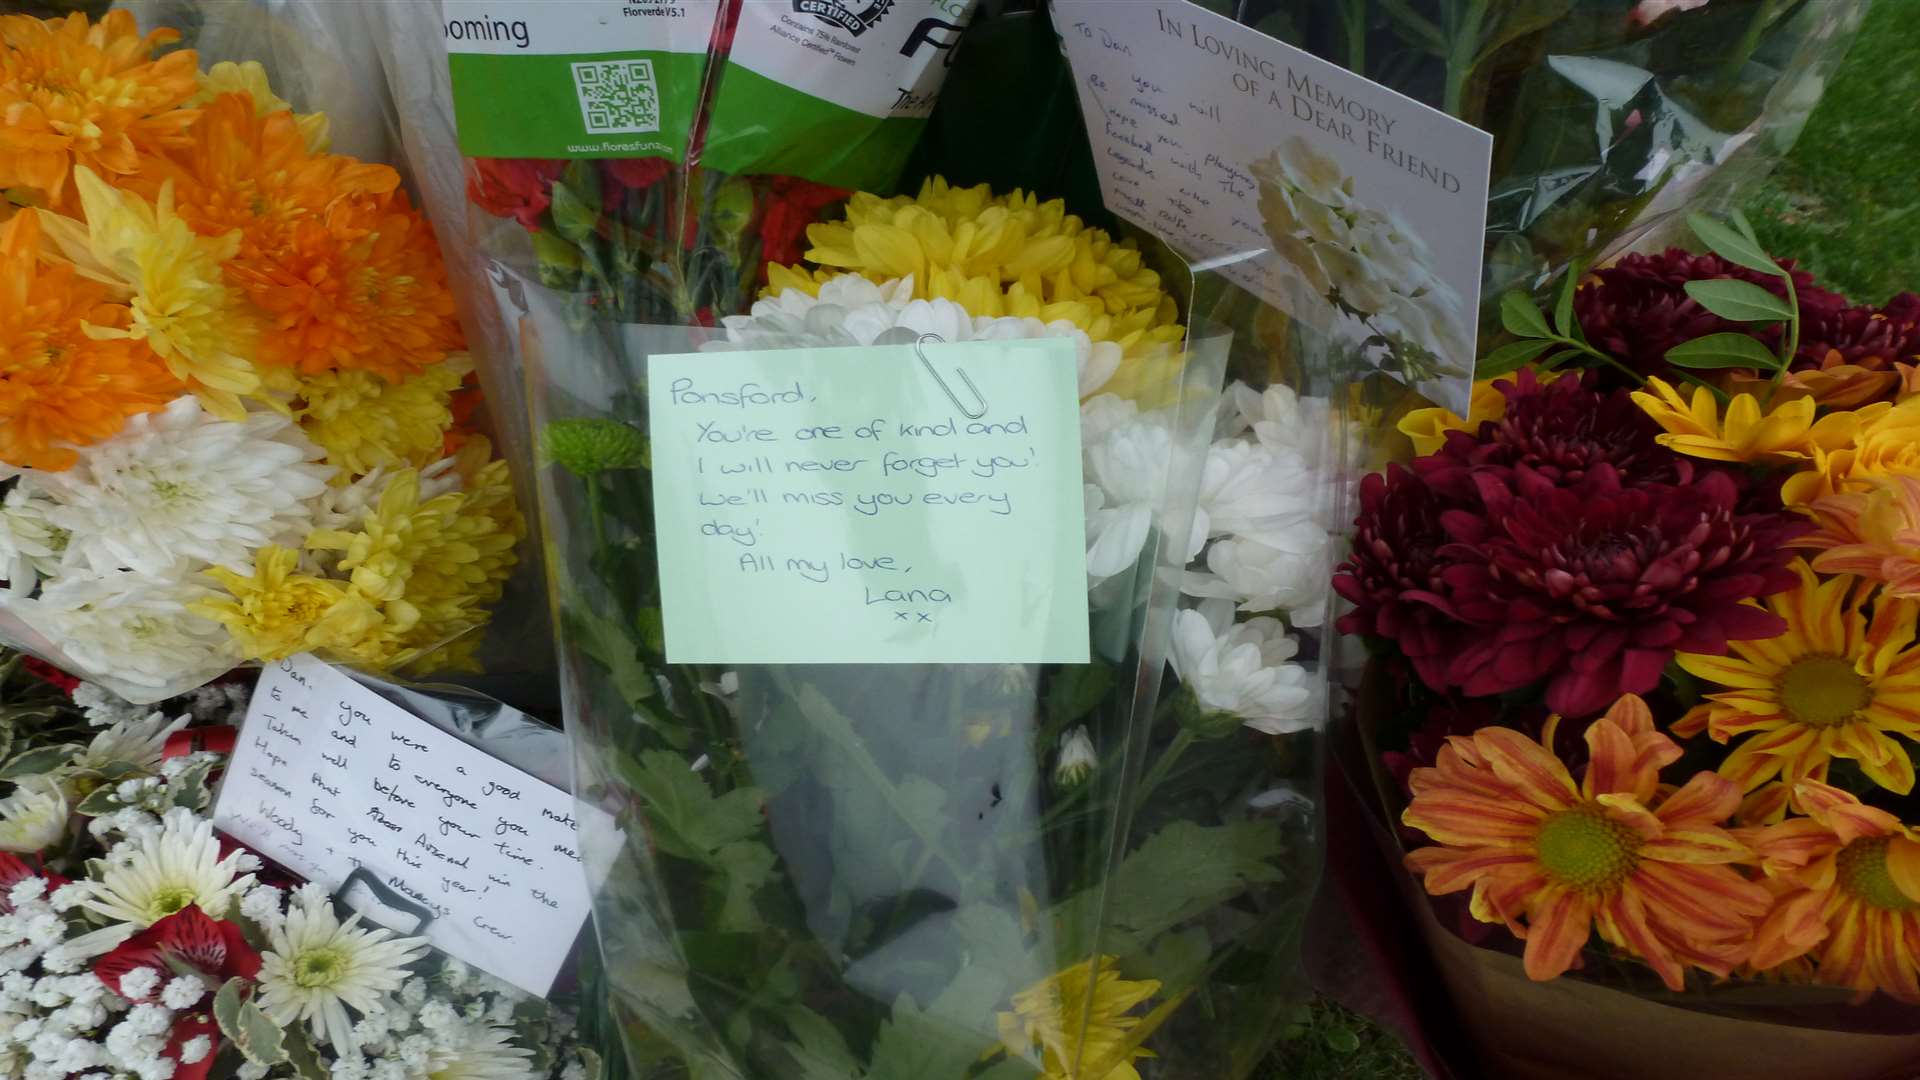 Floral tributes to Danyl Ponsford laid in Ashford